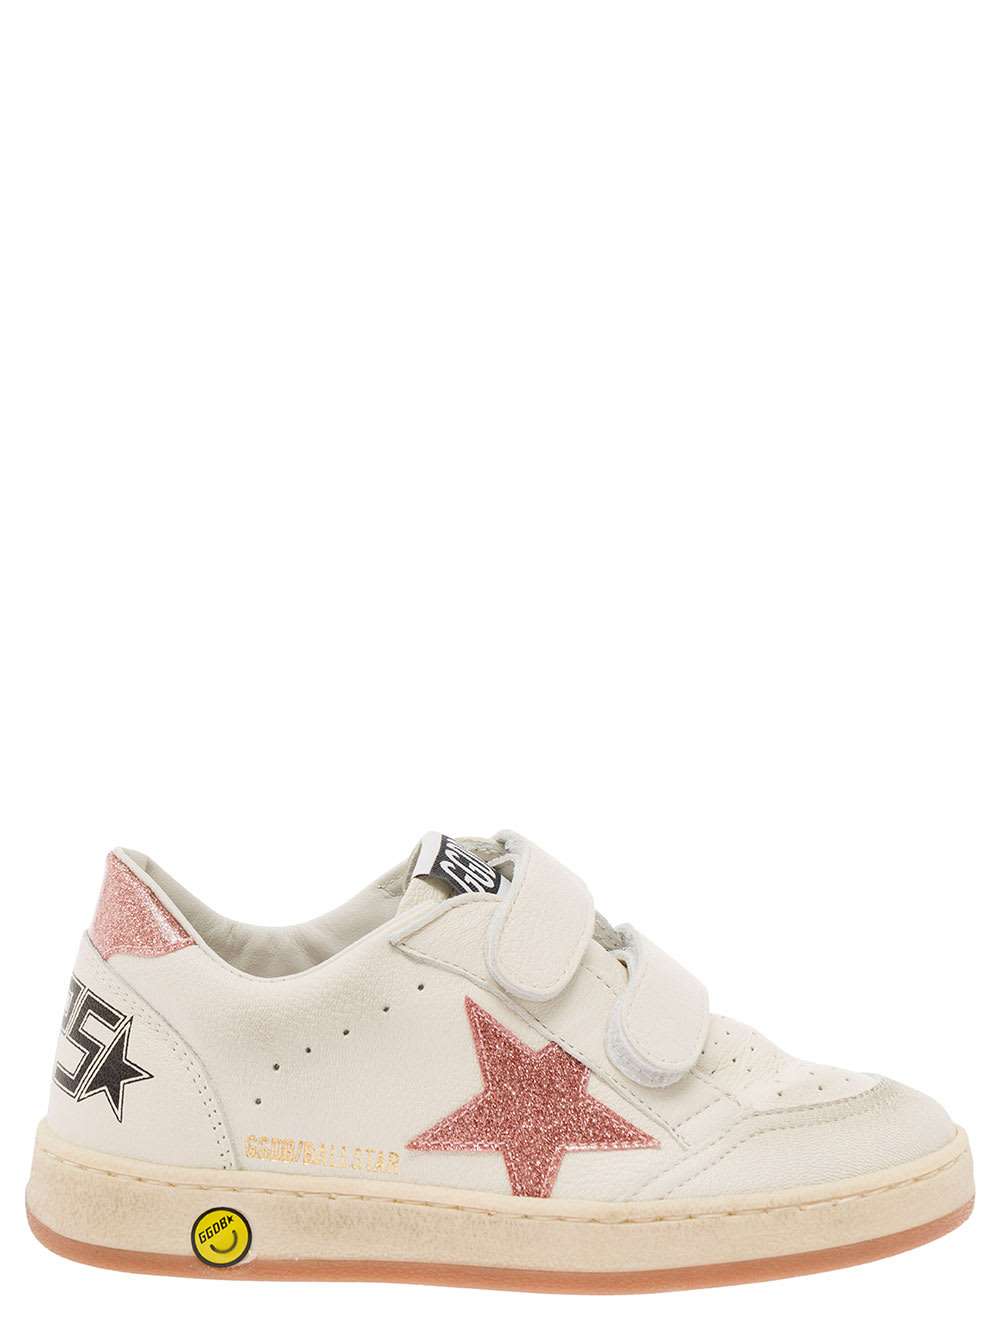 Golden Goose ball-star White Low Top Sneakers With Glitter Star In Leather Girl